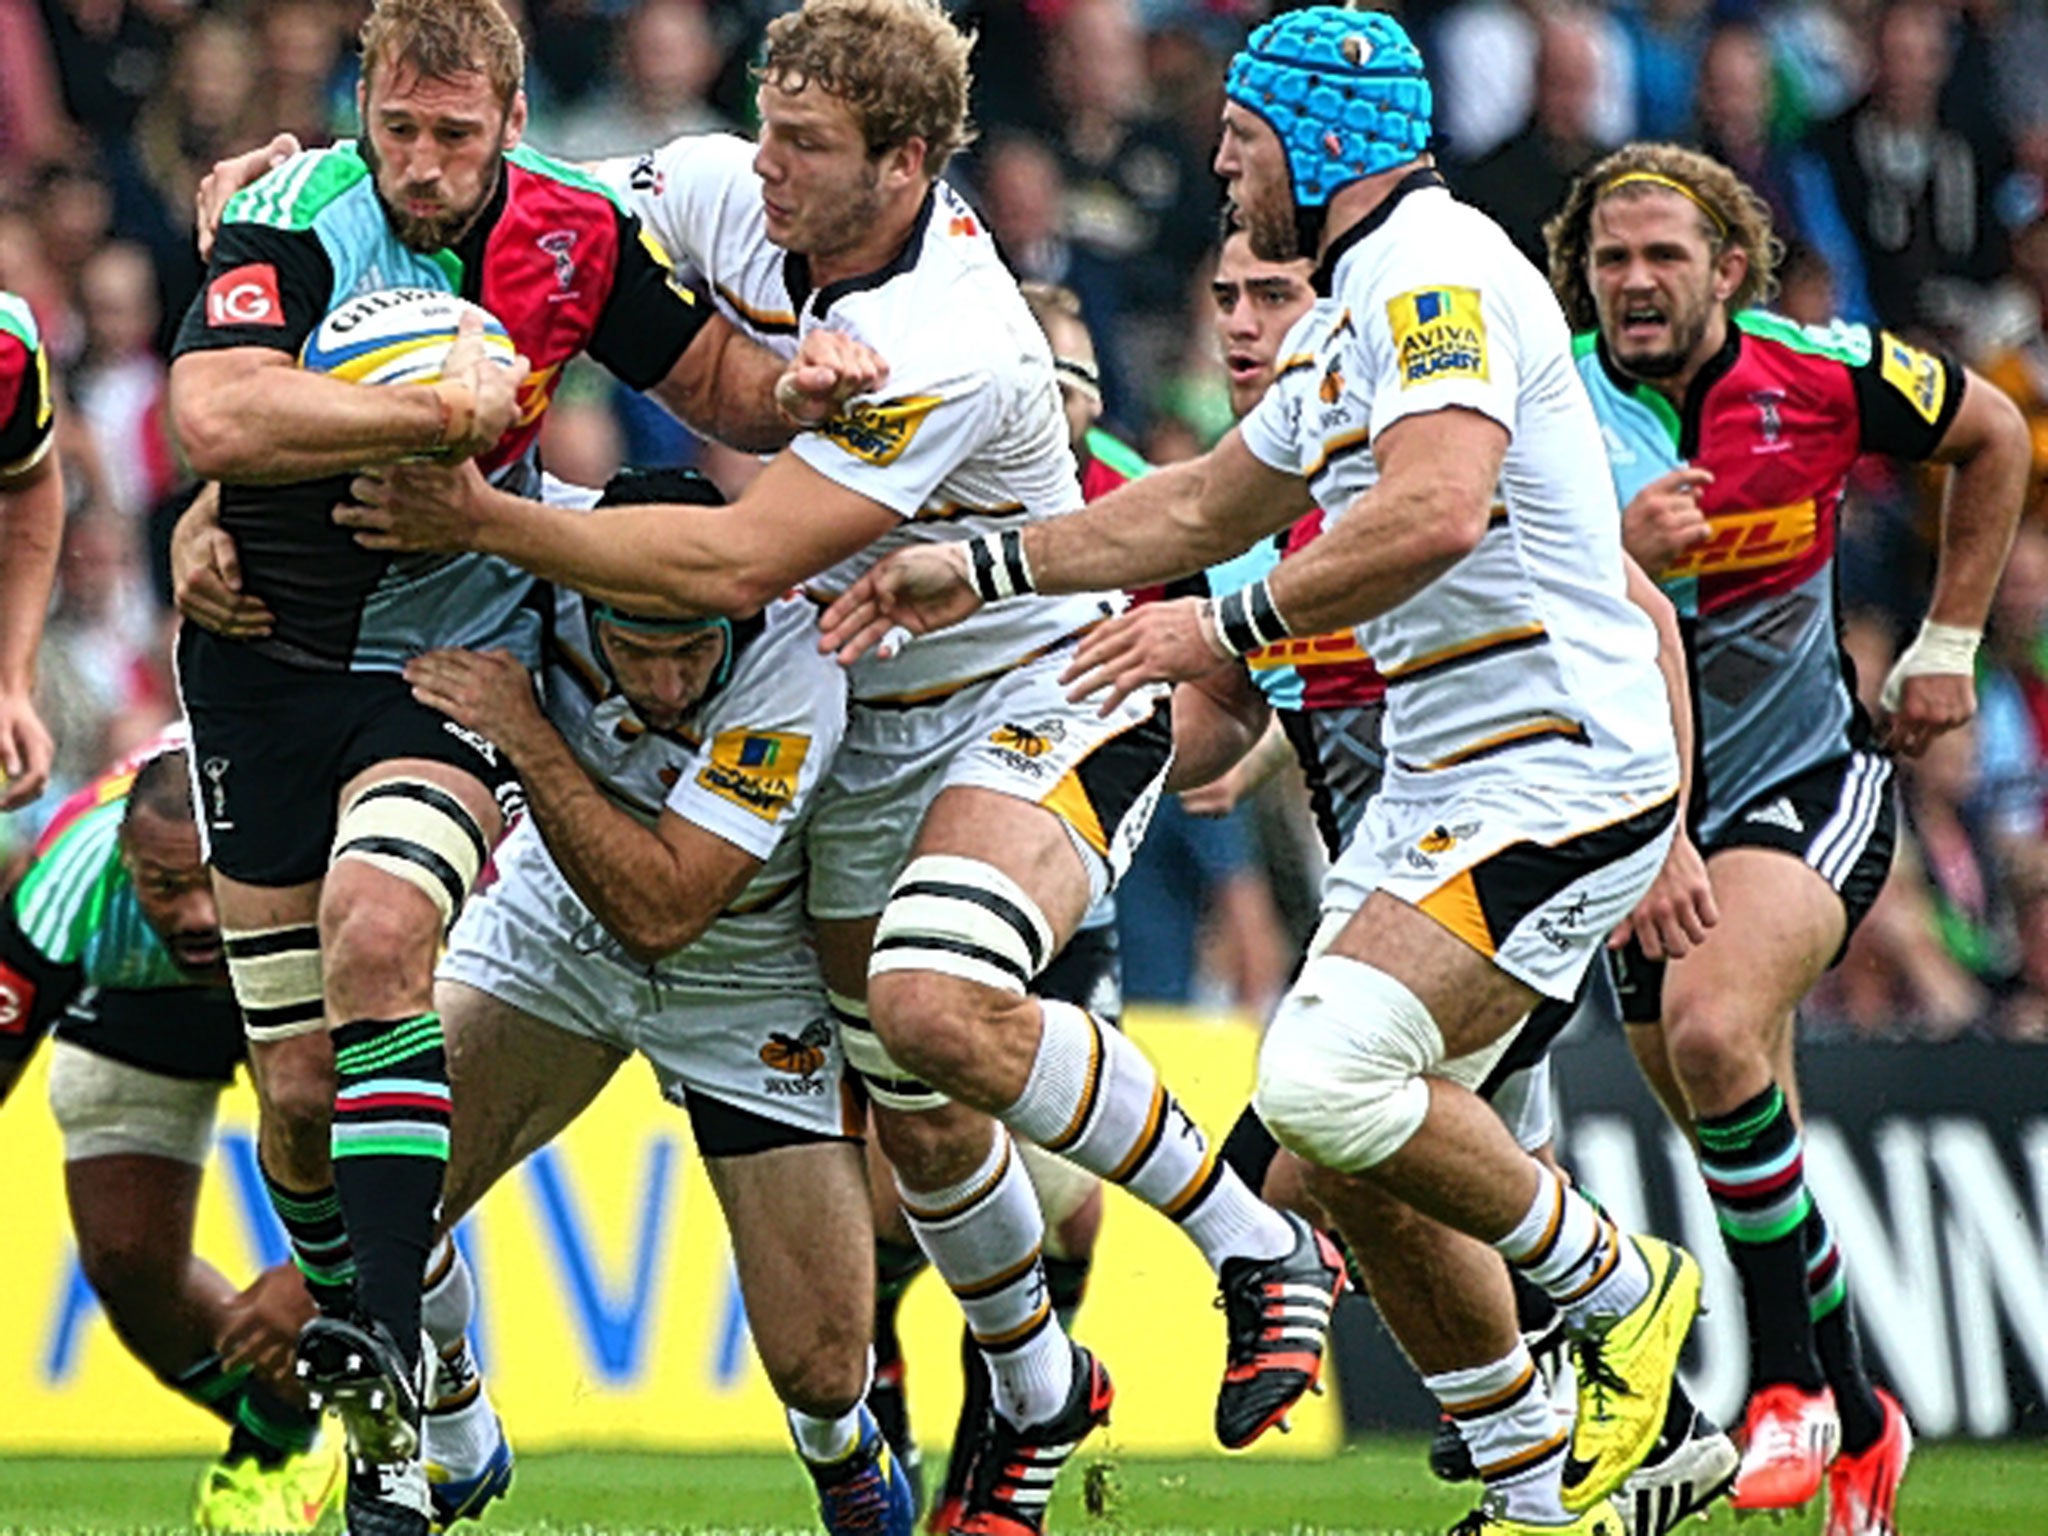 Chris Robshaw makes a break during Harlequins’ win over Wasps on Saturday